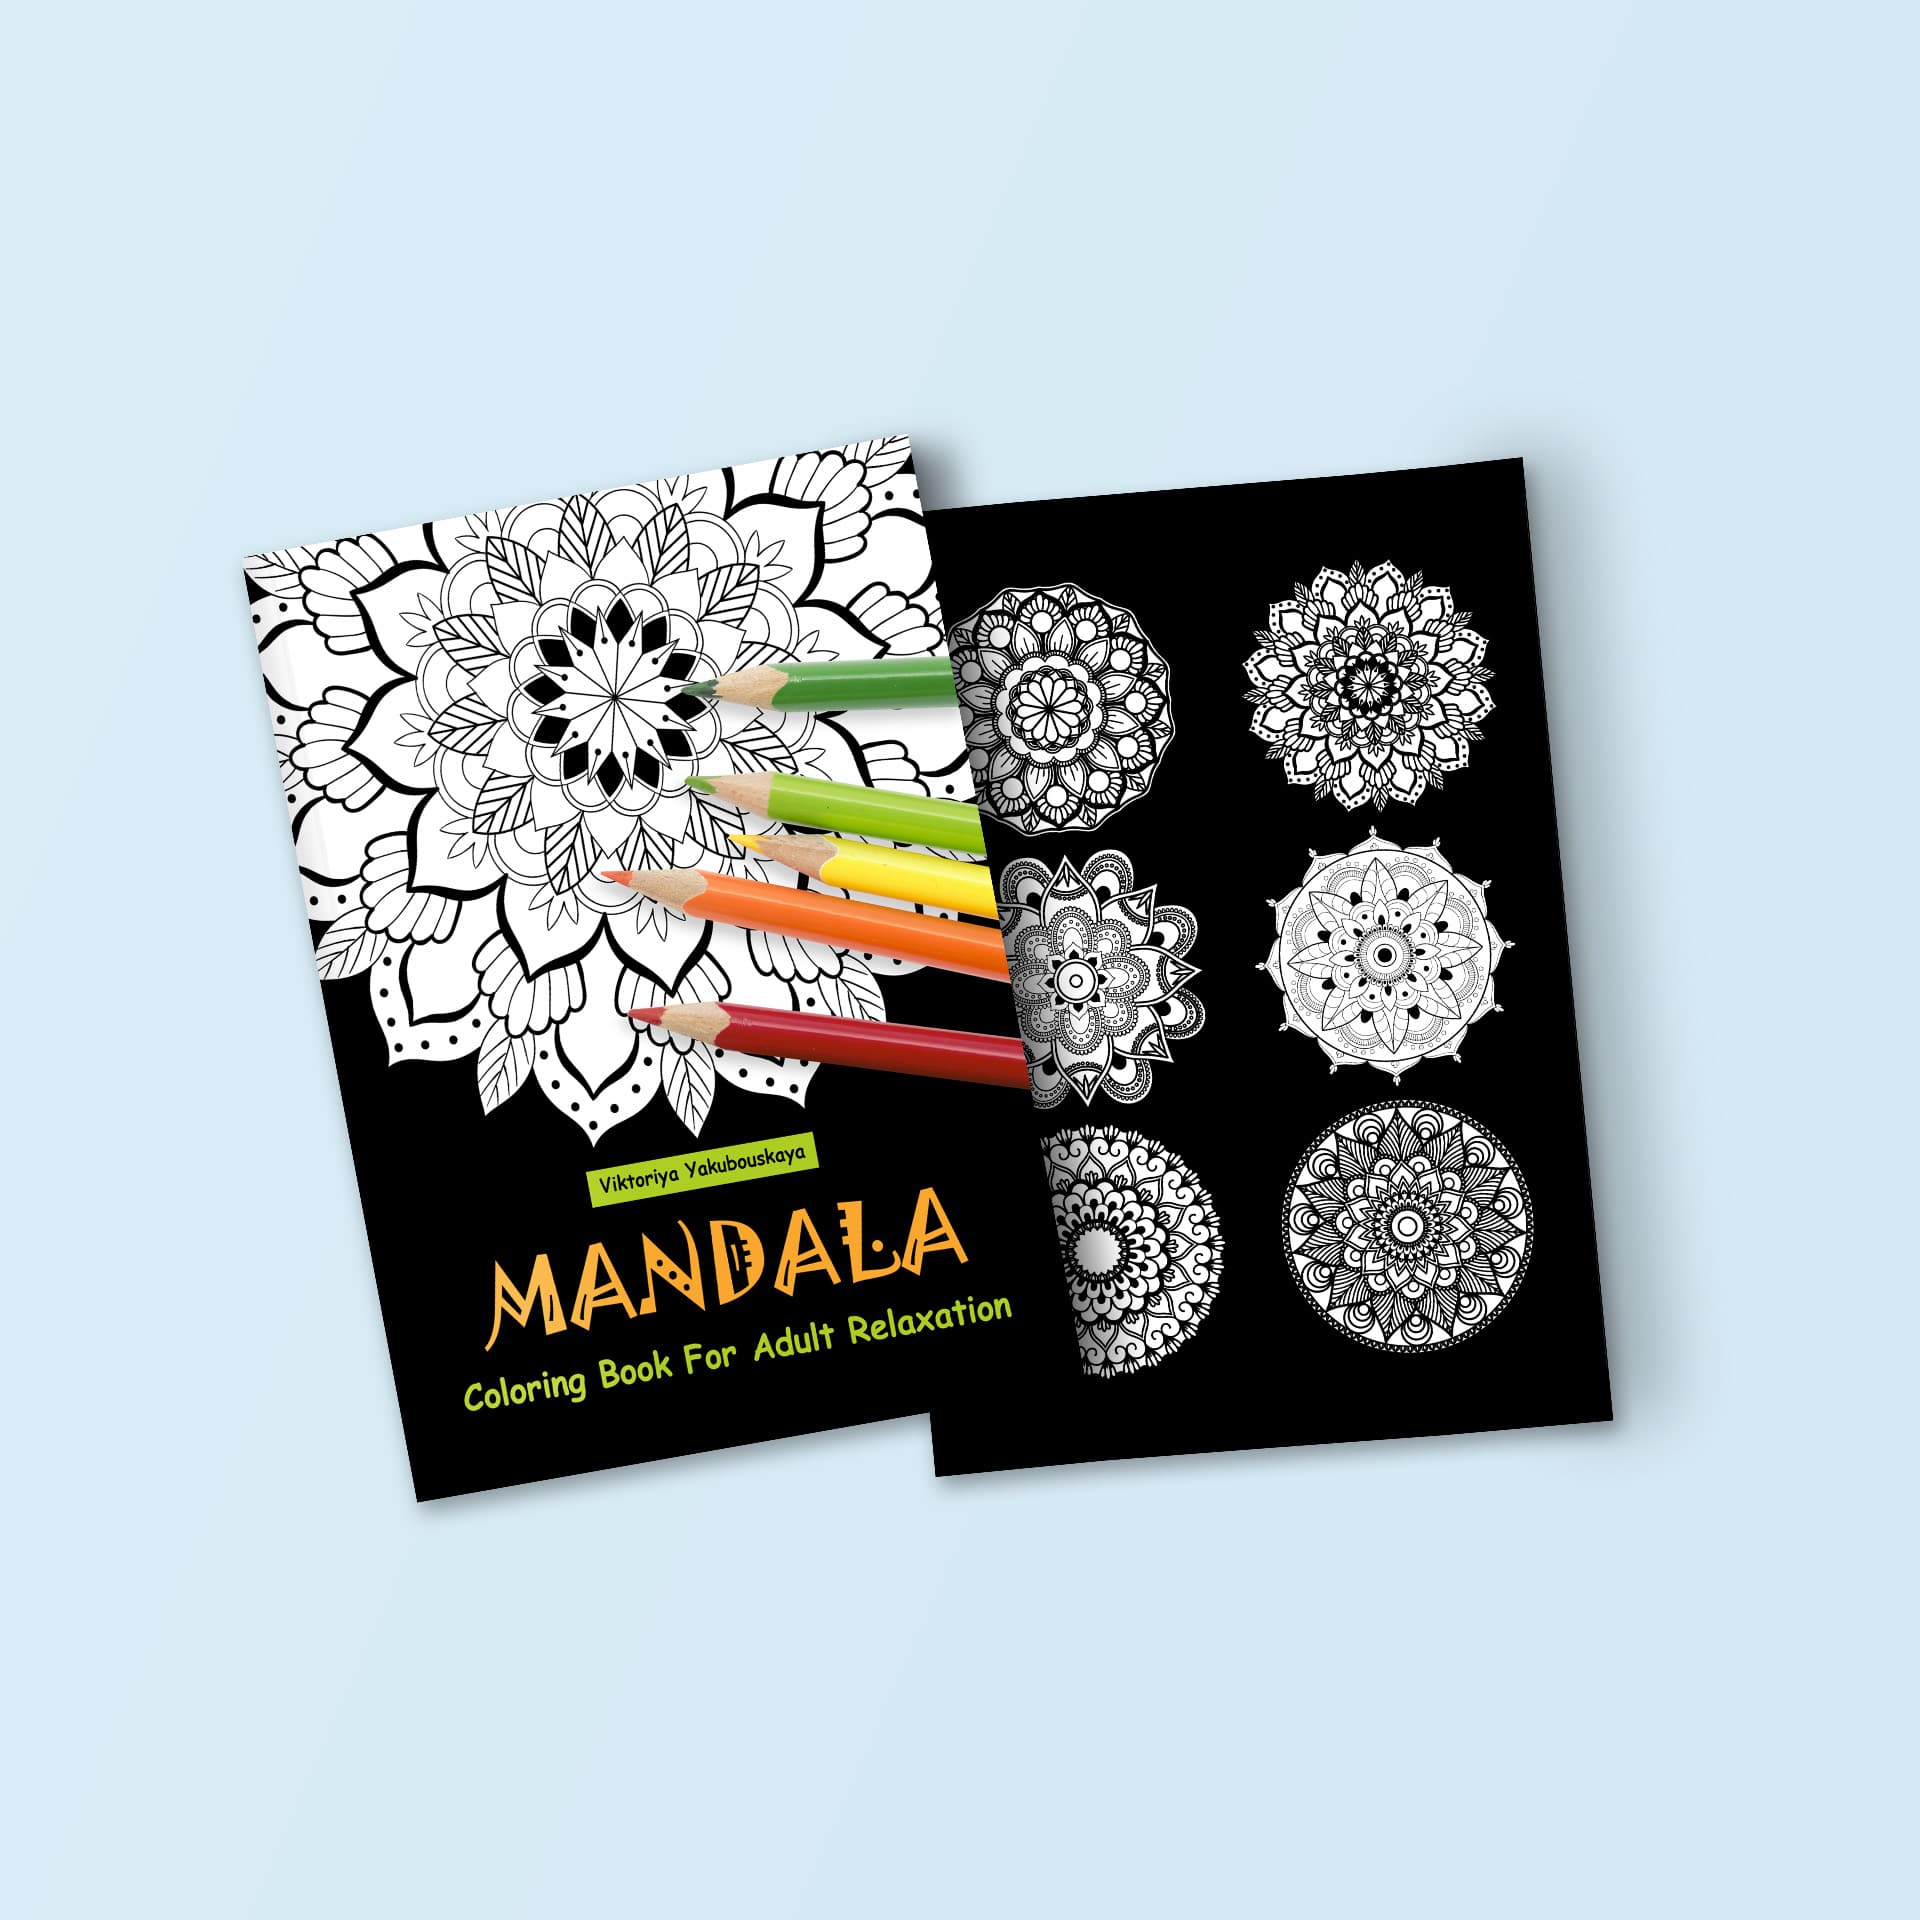 Download Mandala Coloring Books For Adults Relaxation Restylegraphic